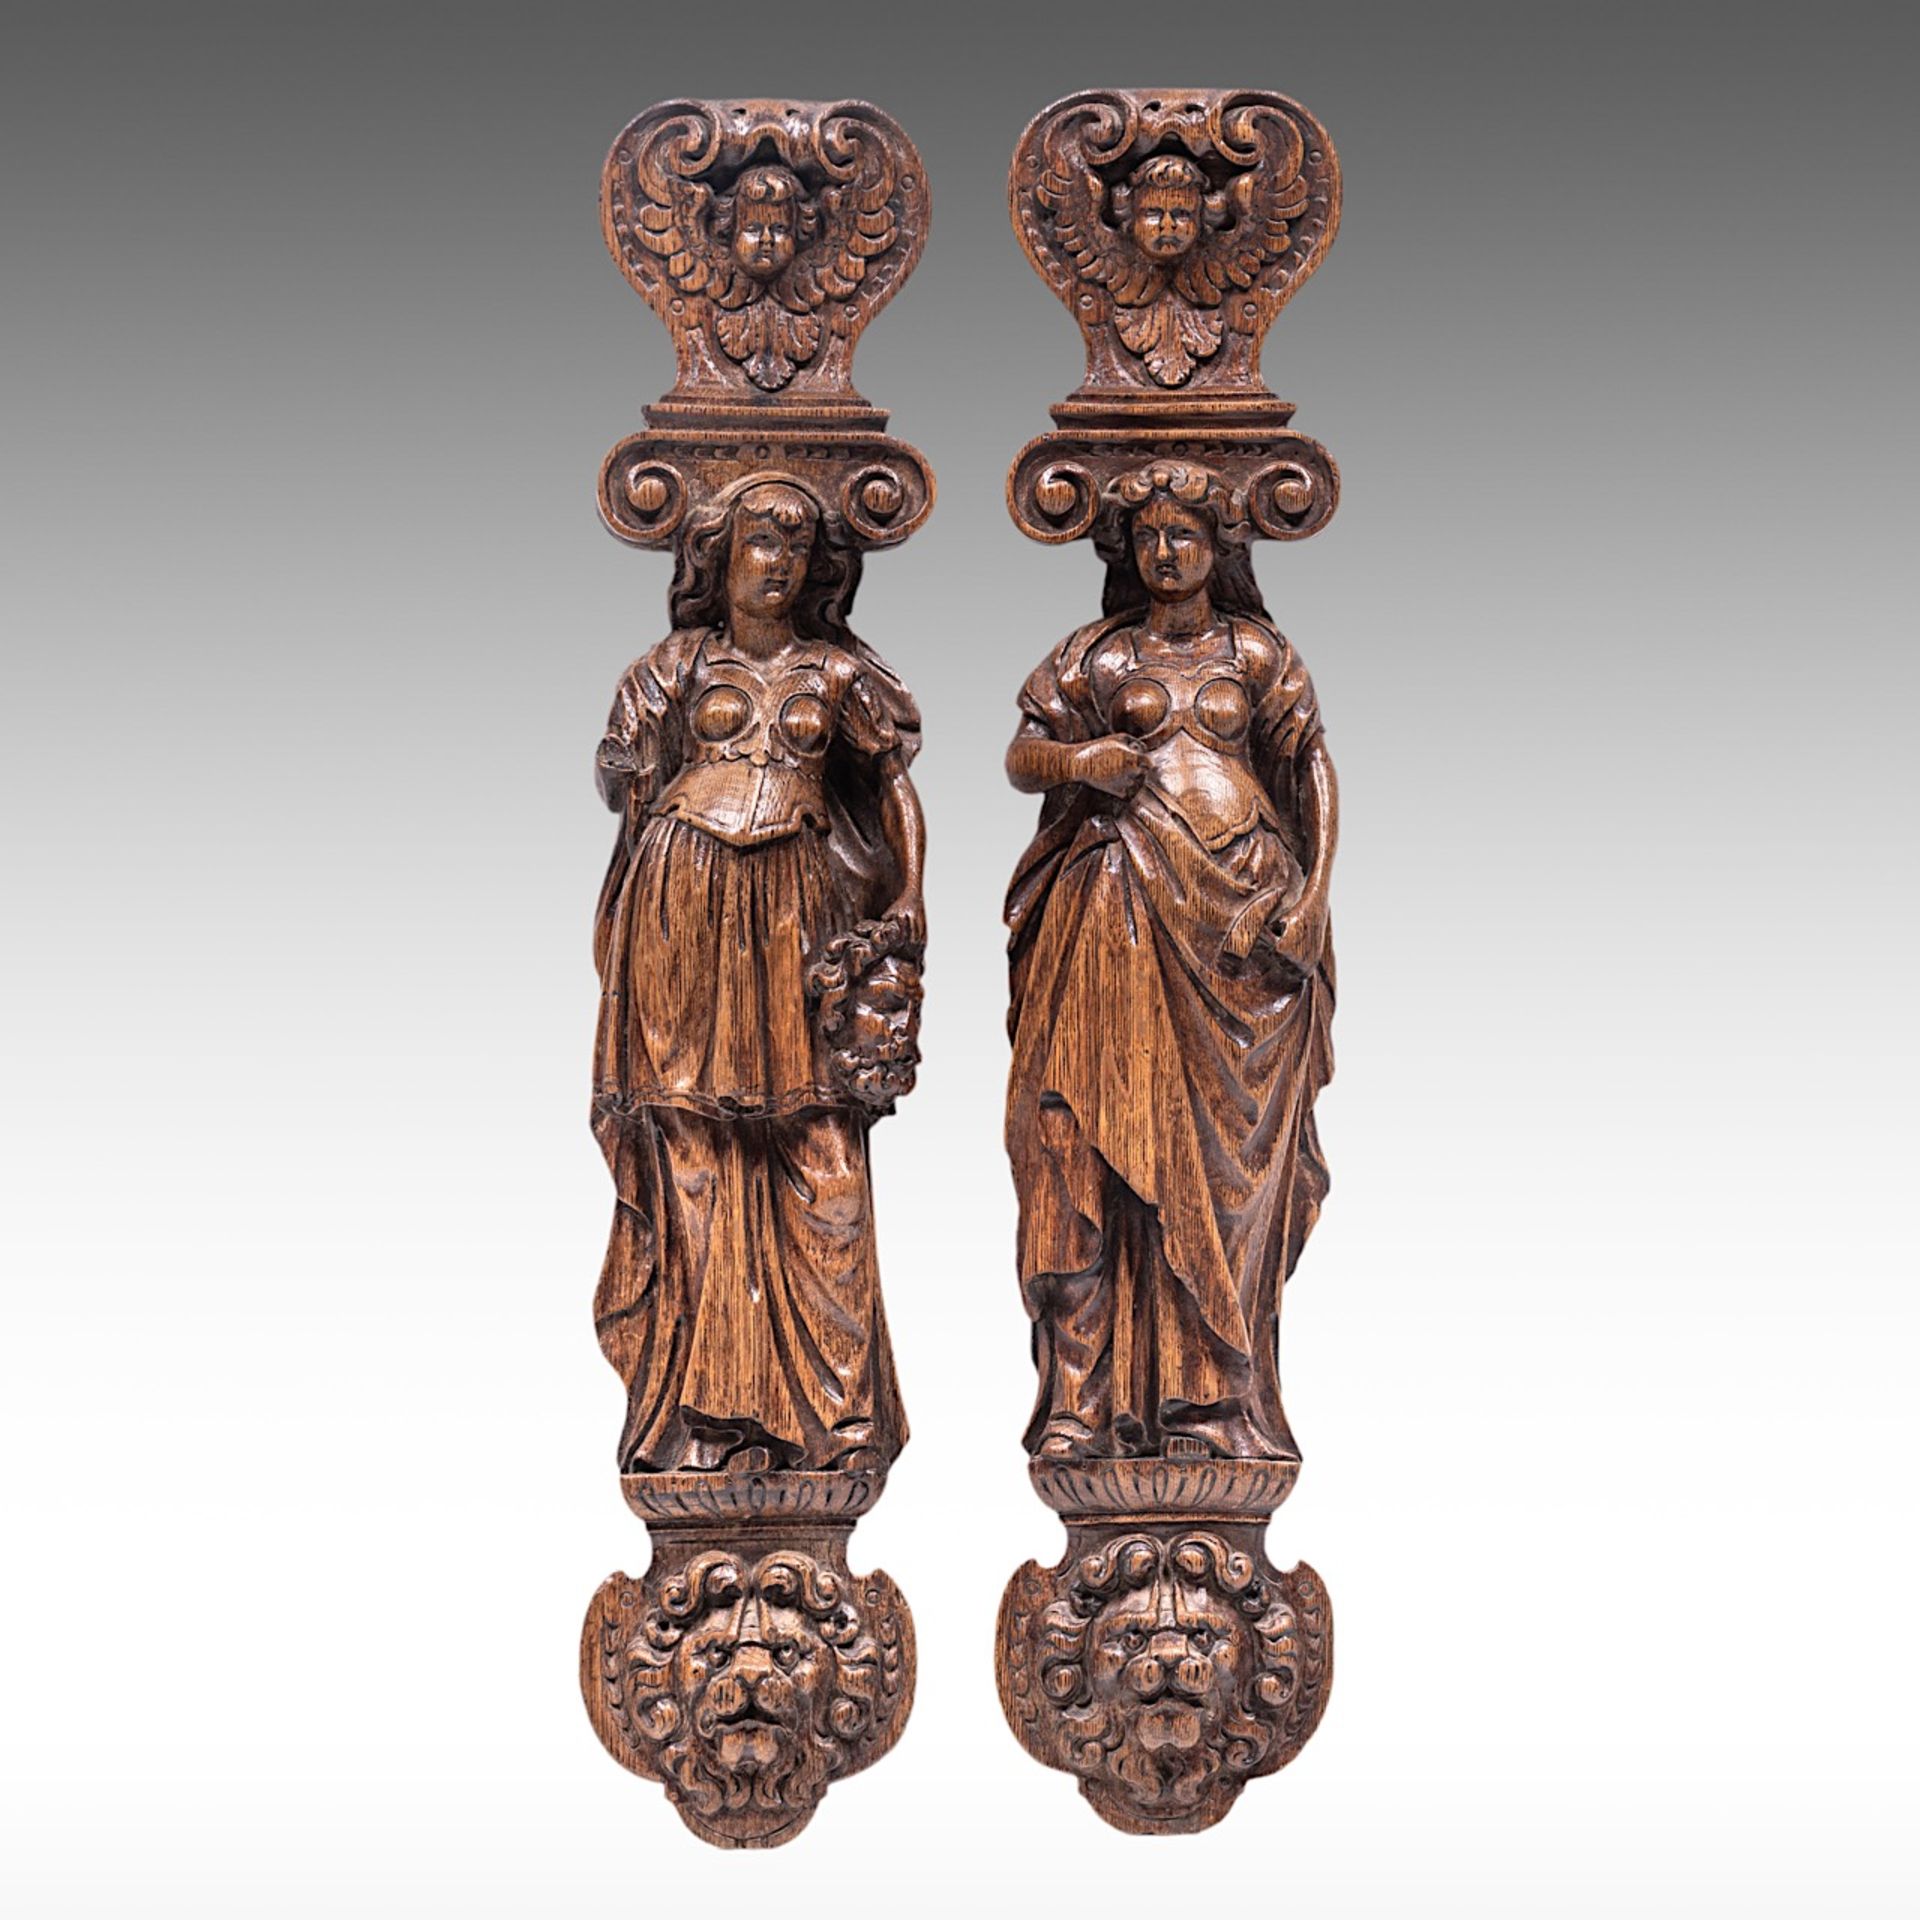 A pair of carved oak architectural ornaments of caryatids, 17thC, H 66 cm